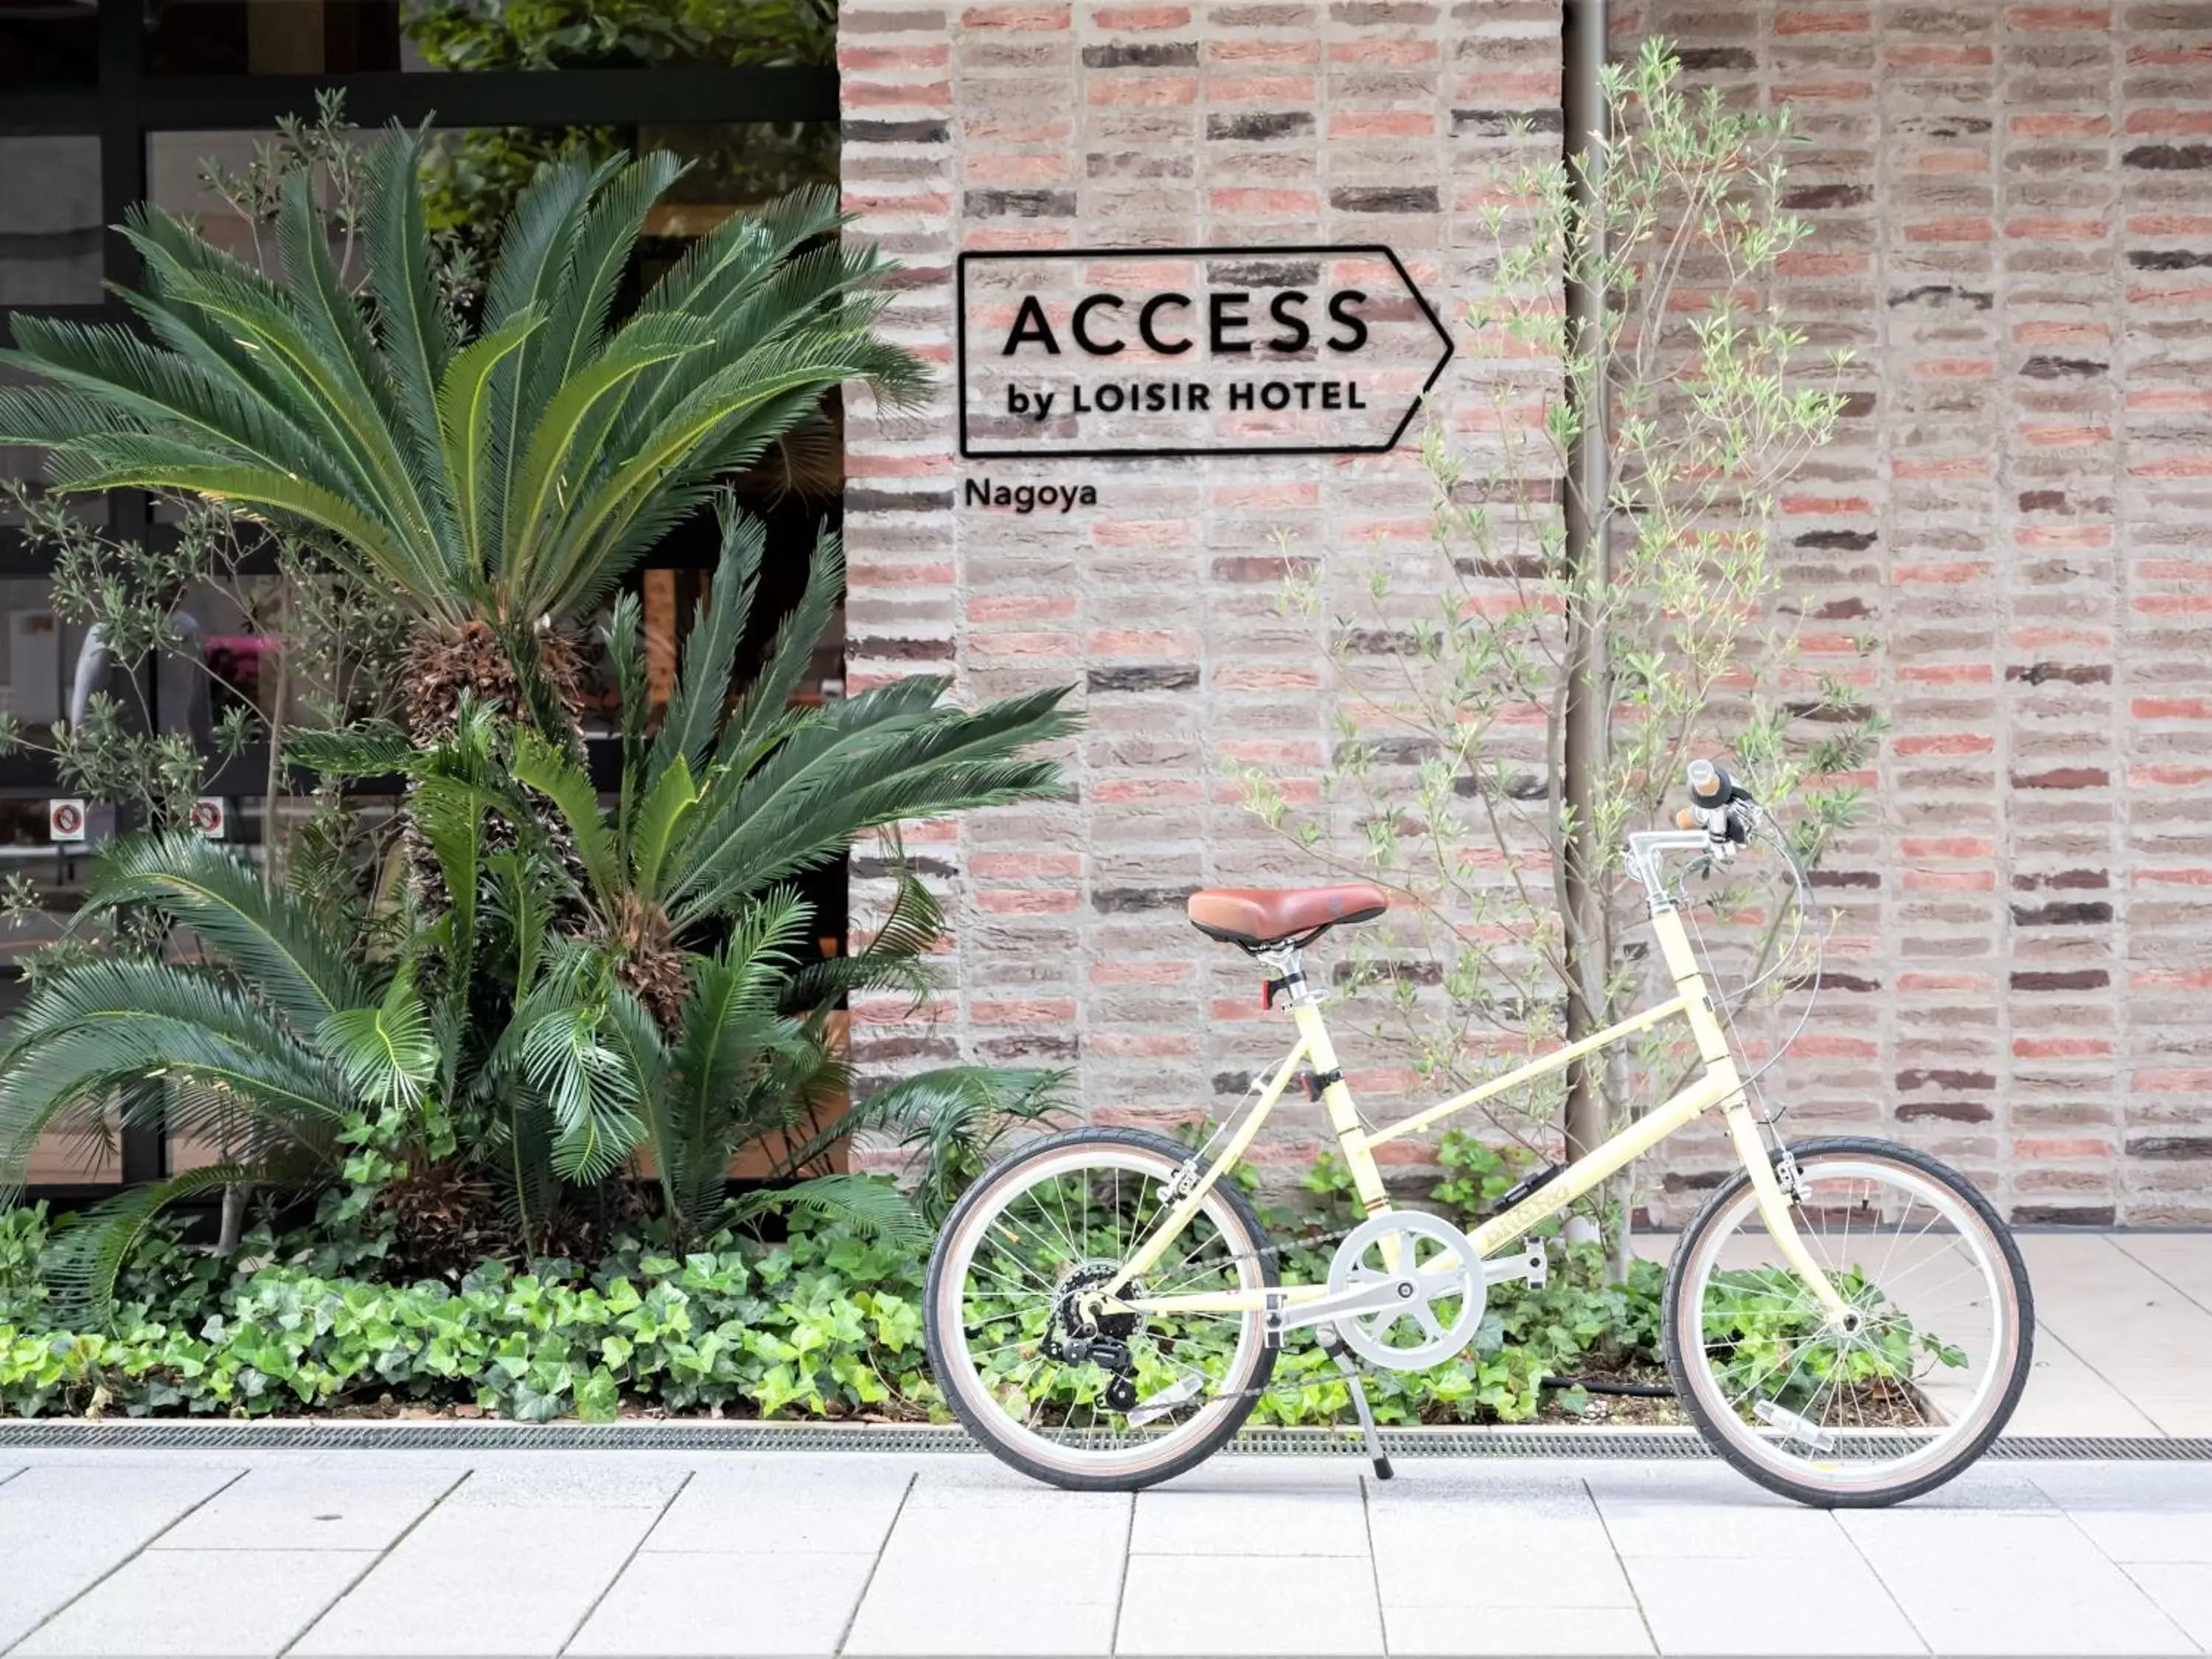 Property building in ACCESS by LOISIR HOTEL Nagoya